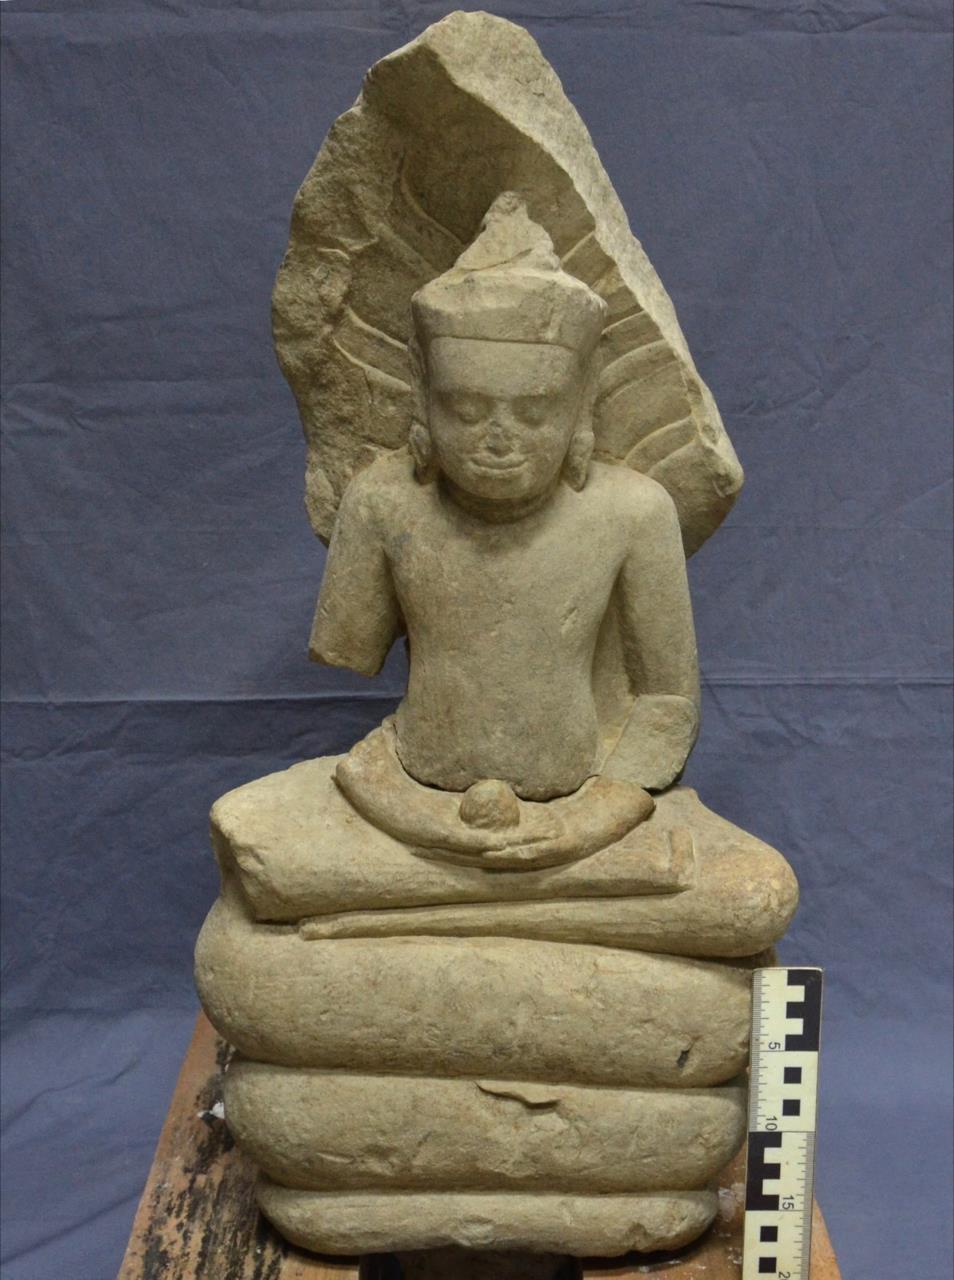 In Quest of Angkorian Medicine Buddha and Boddhisatva: New Archaeological Evidence historians, museum curators, and art lovers, adding a dose of romanticism to the actual scientific and